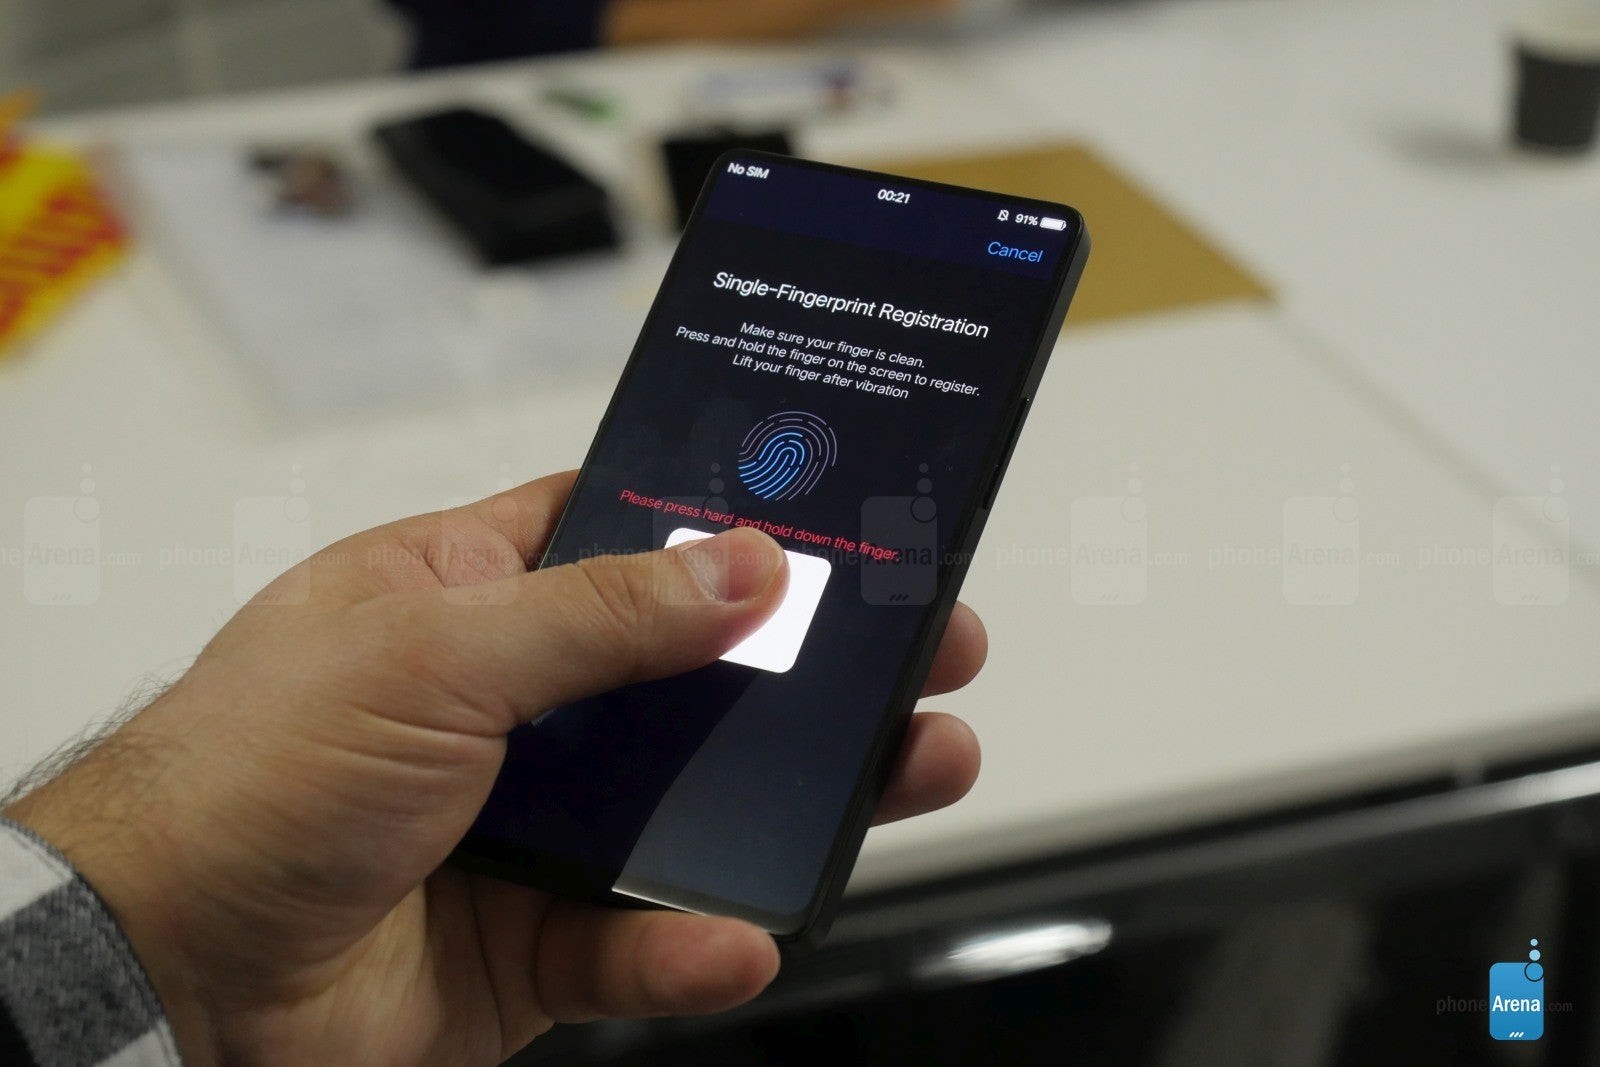 Hands-on with the 99% bezelless phone that has a fingerprint scanner under the screen